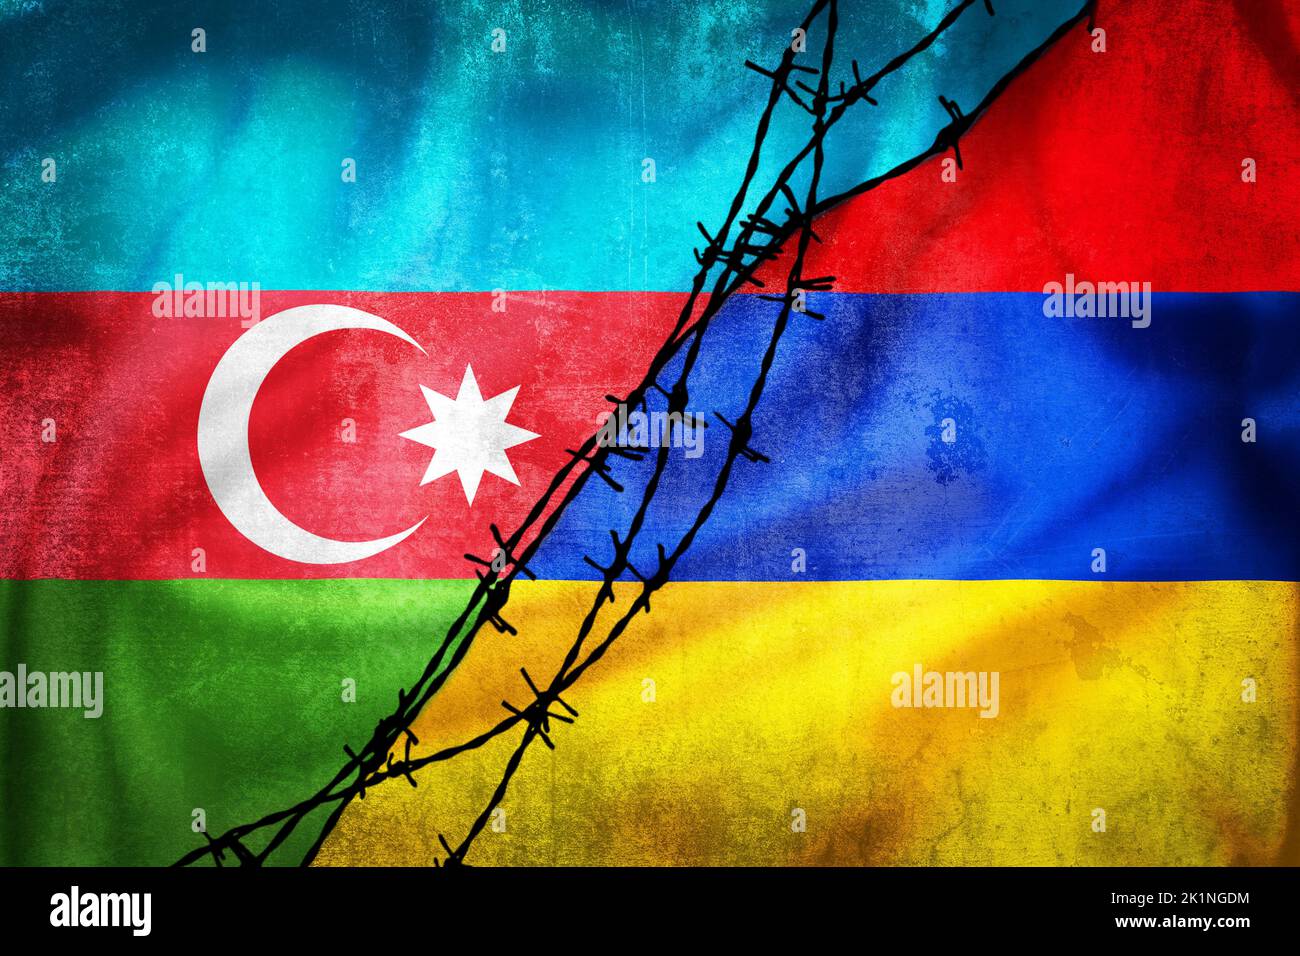 Grunge flags of Azerbaijan and Armenia divided by barb wire illustration, concept of tense relations between two countries Stock Photo